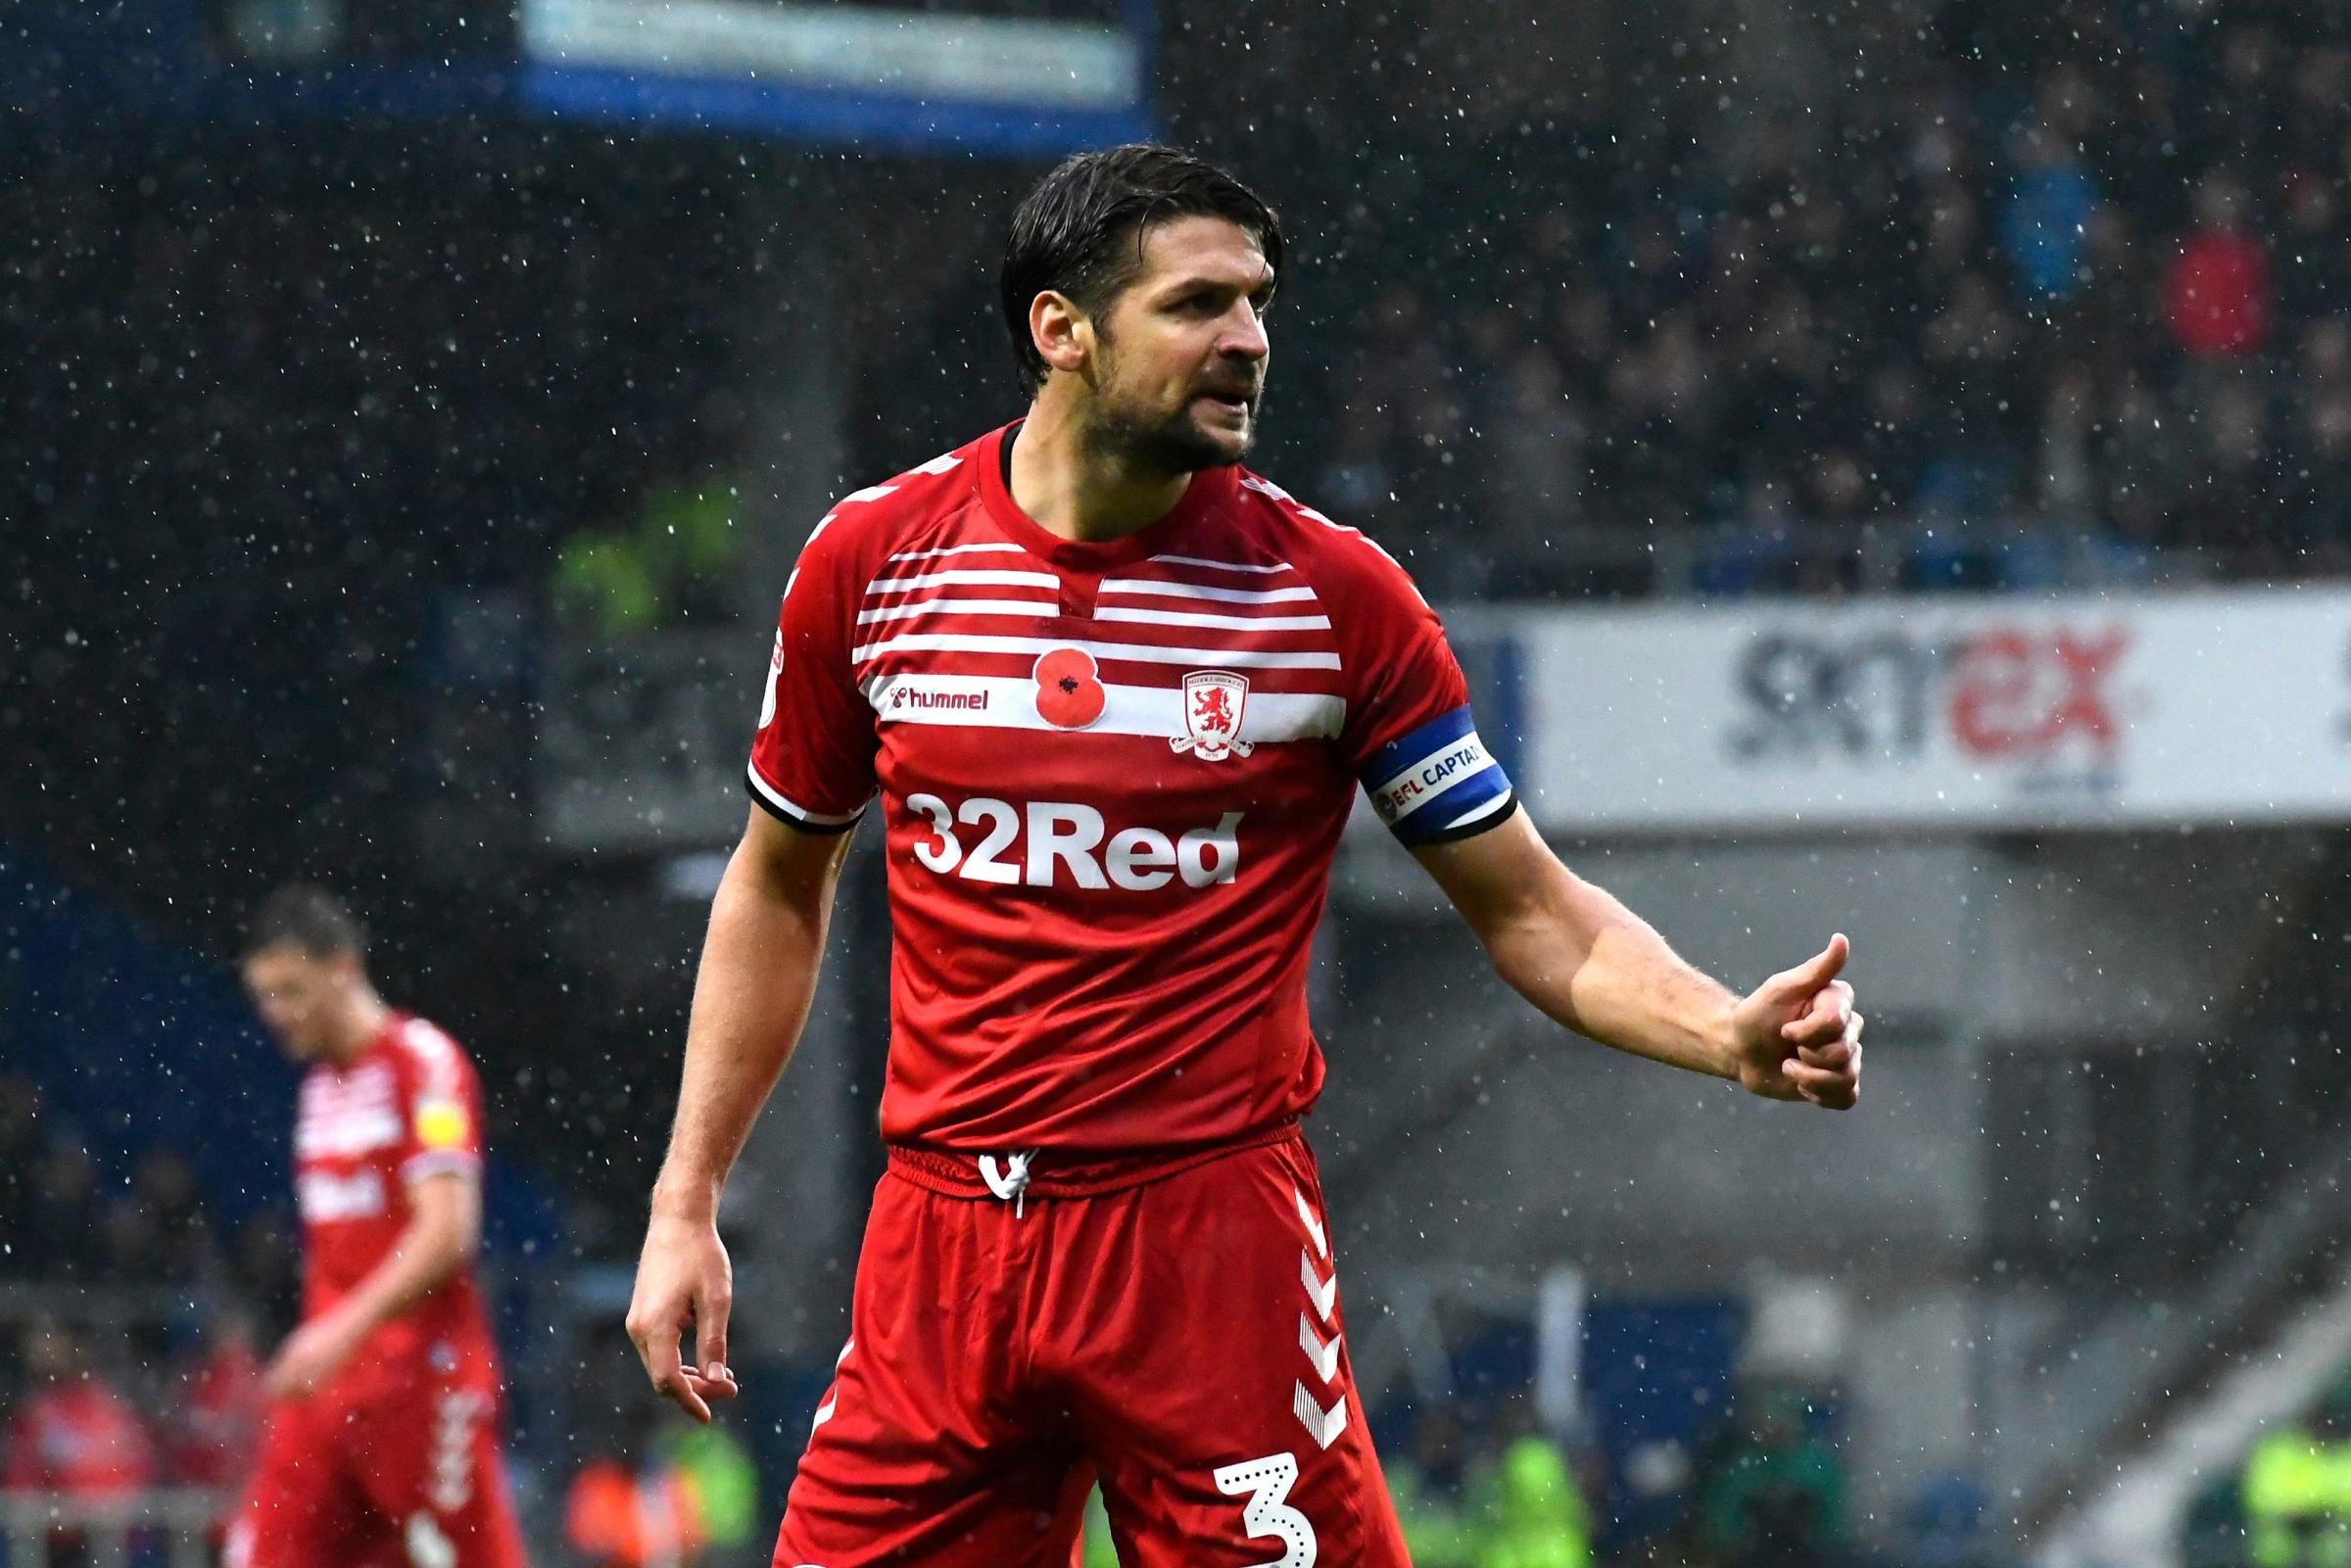 Neil Warnock confirms contract offer to George Friend and Marvin Johnson